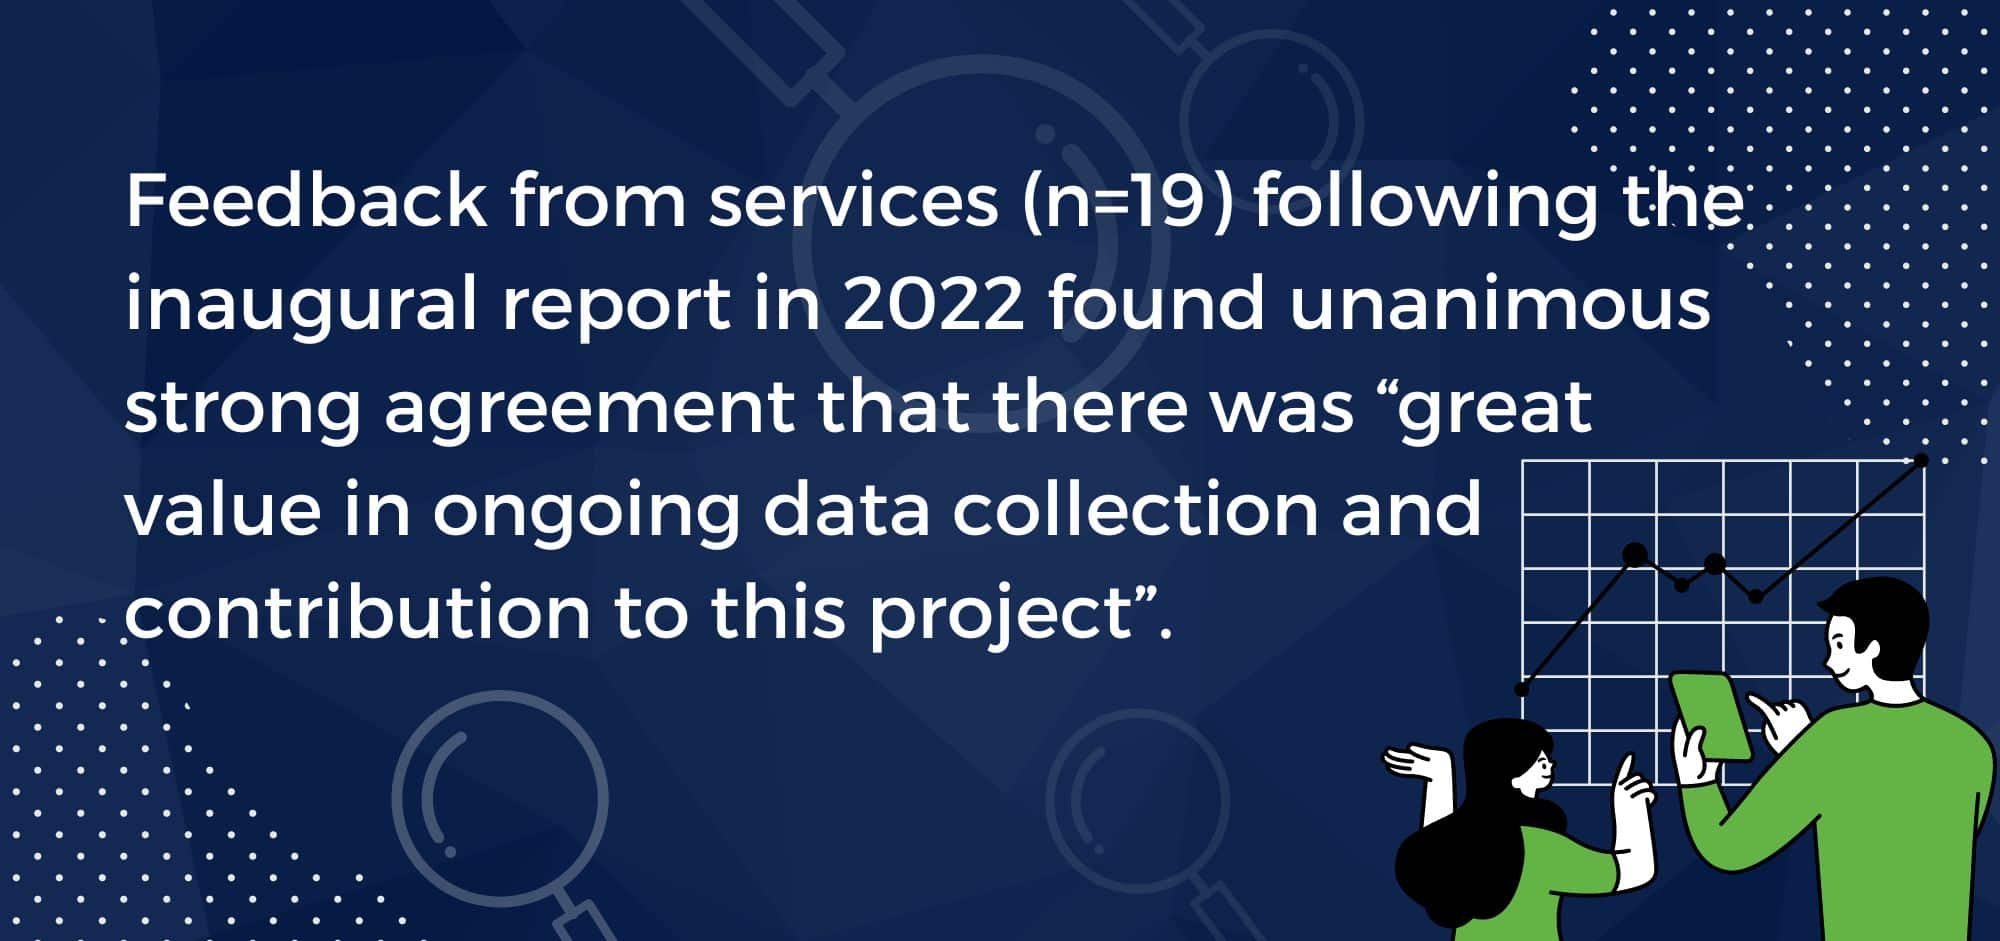 Feedback from services (n=19) following the inaugural report in 2022 found unanimous strong agreement that there was “great value in ongoing data collection and contribution to this project”.